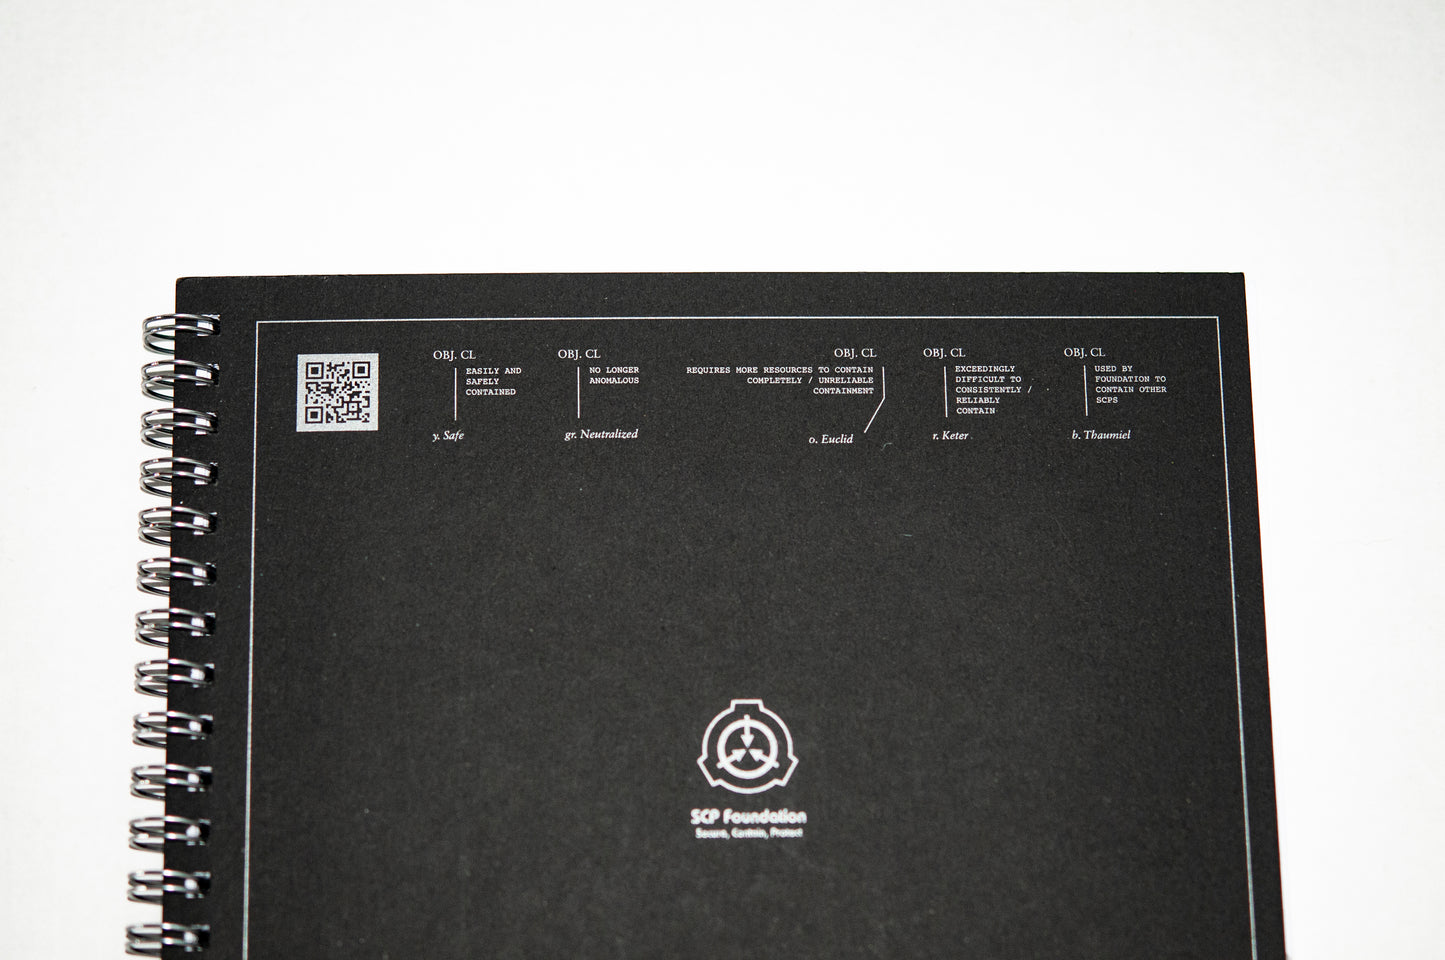 SCP Foundation Notebook